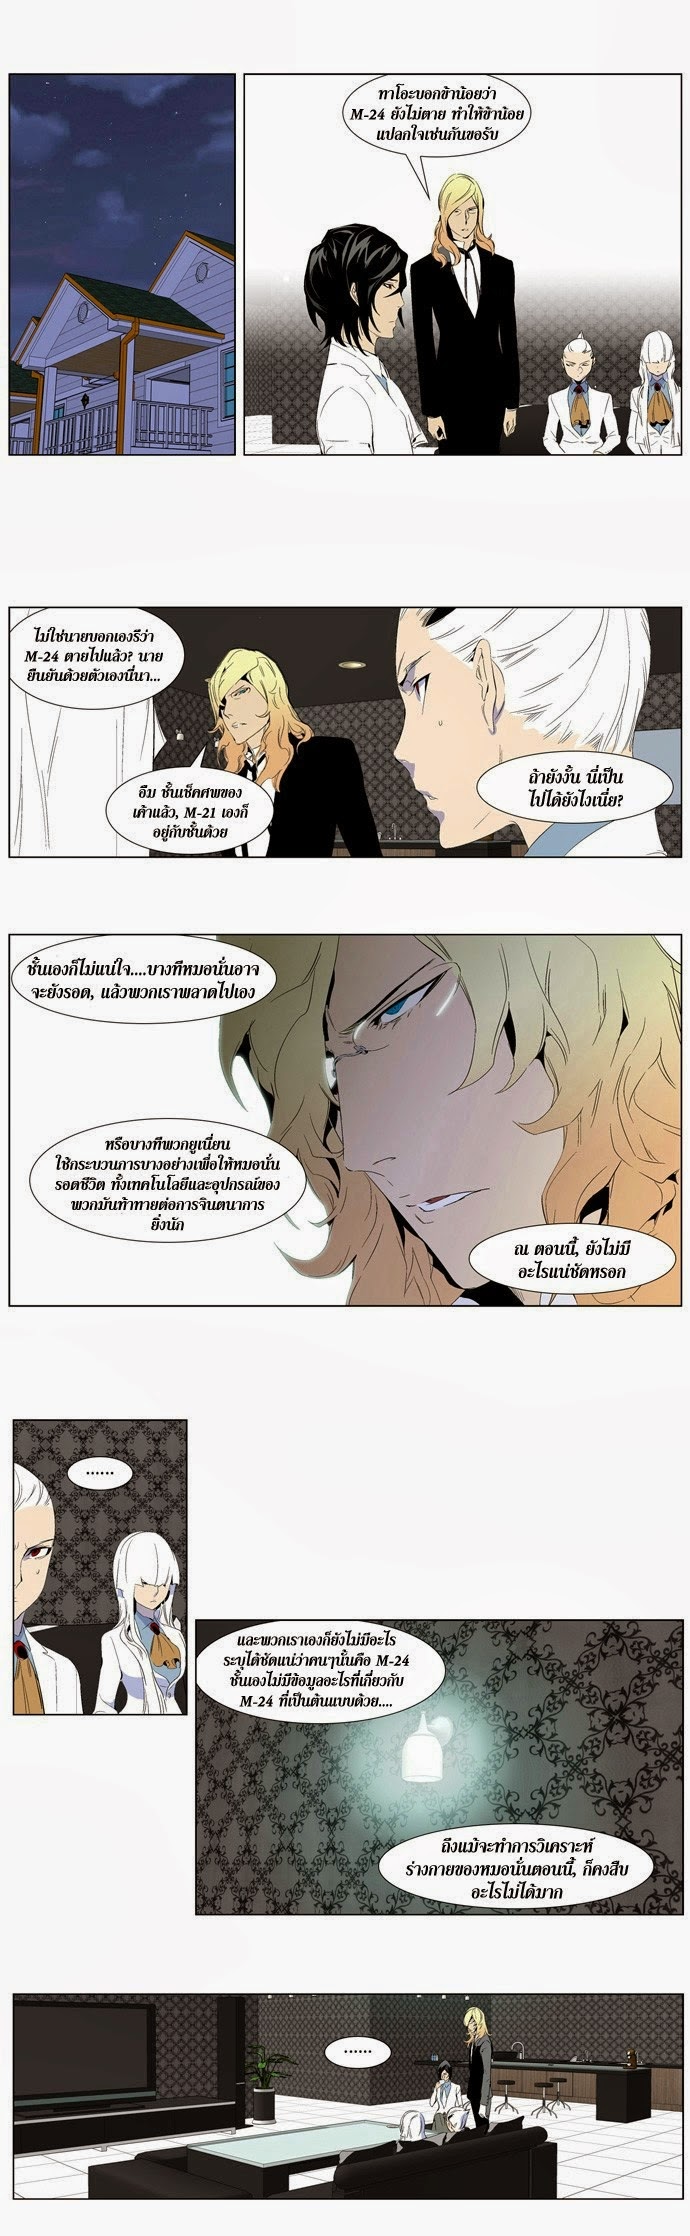 Noblesse 248 012